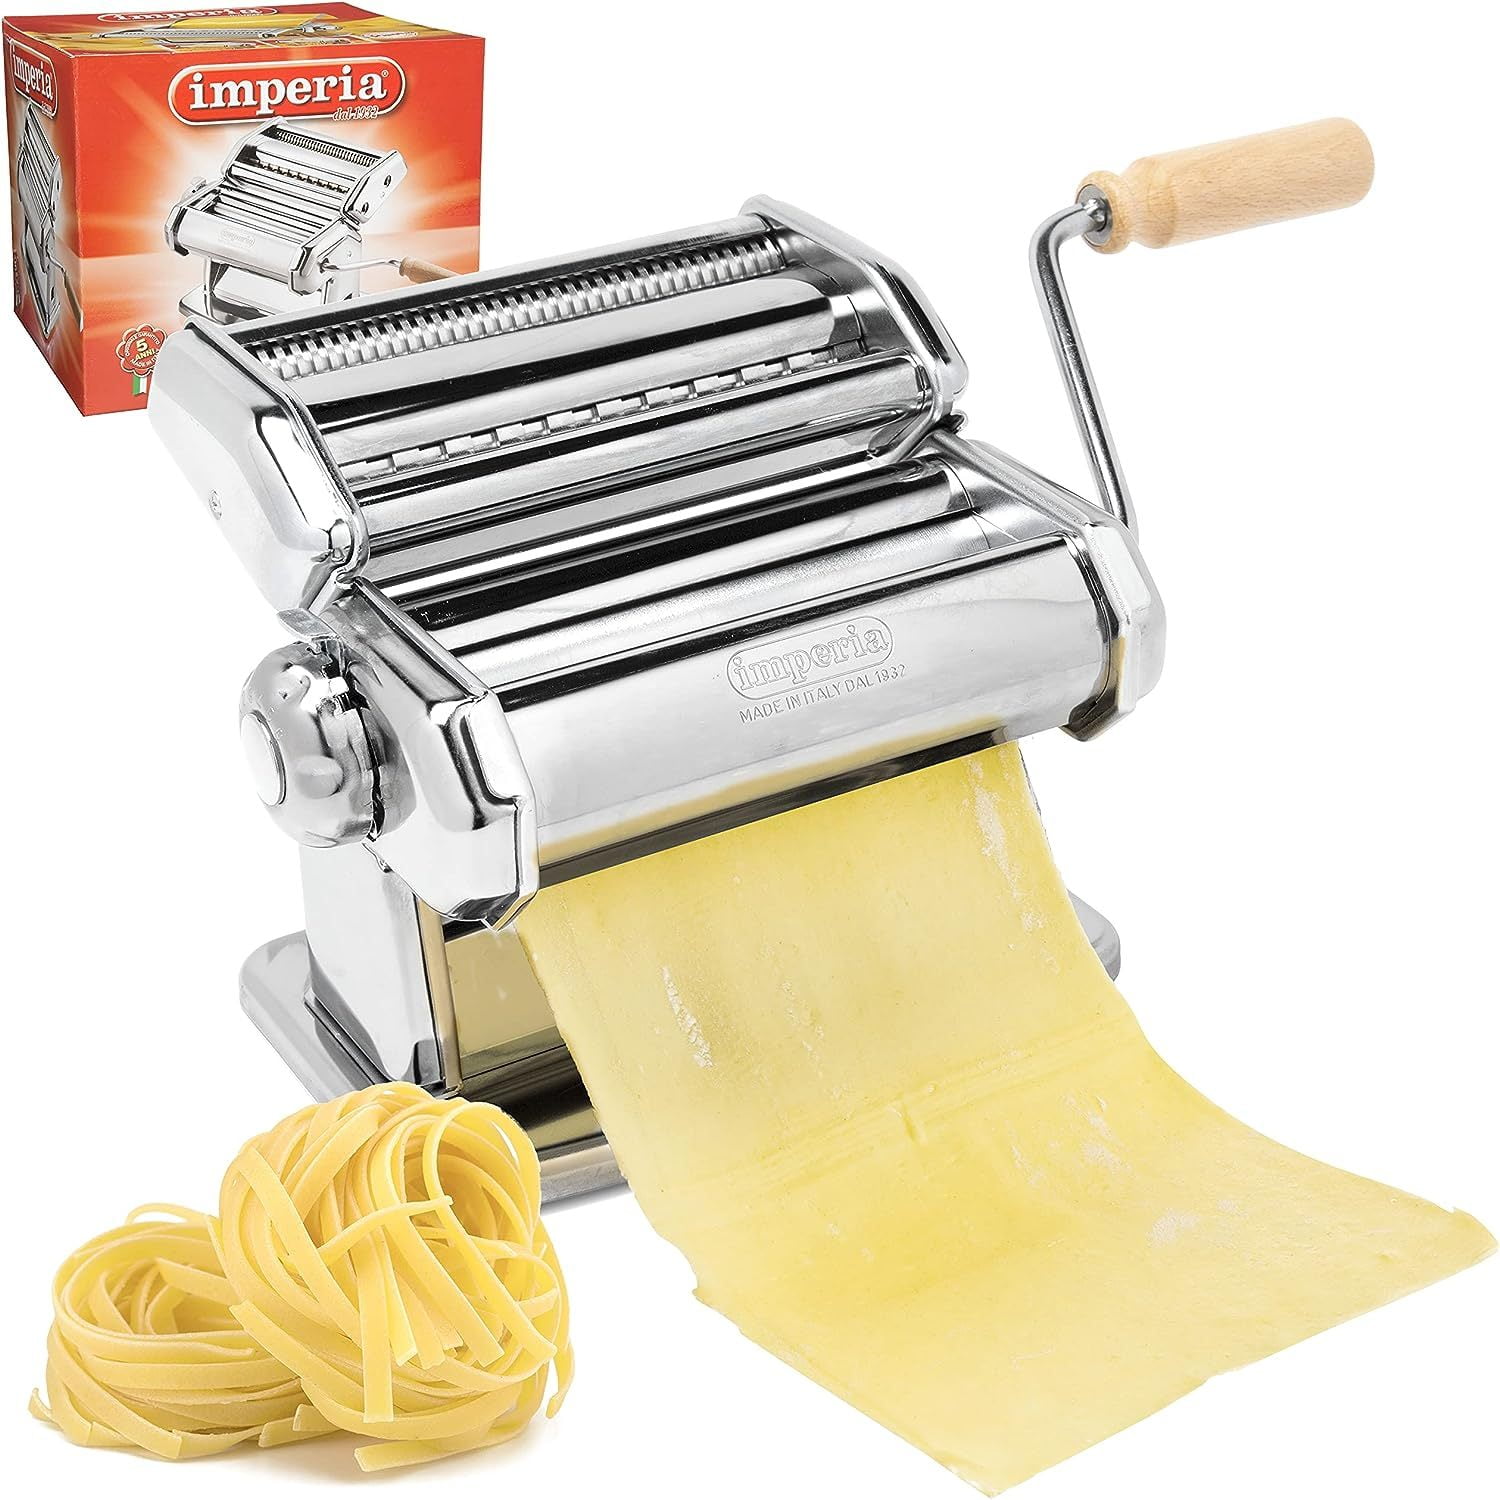 Imperia Pasta Maker Machine- Deluxe 11 Piece Set w Machine, Attachments,  Recipes and Accessories - Made in Italy, Make Authentic Homemade Noodles  like